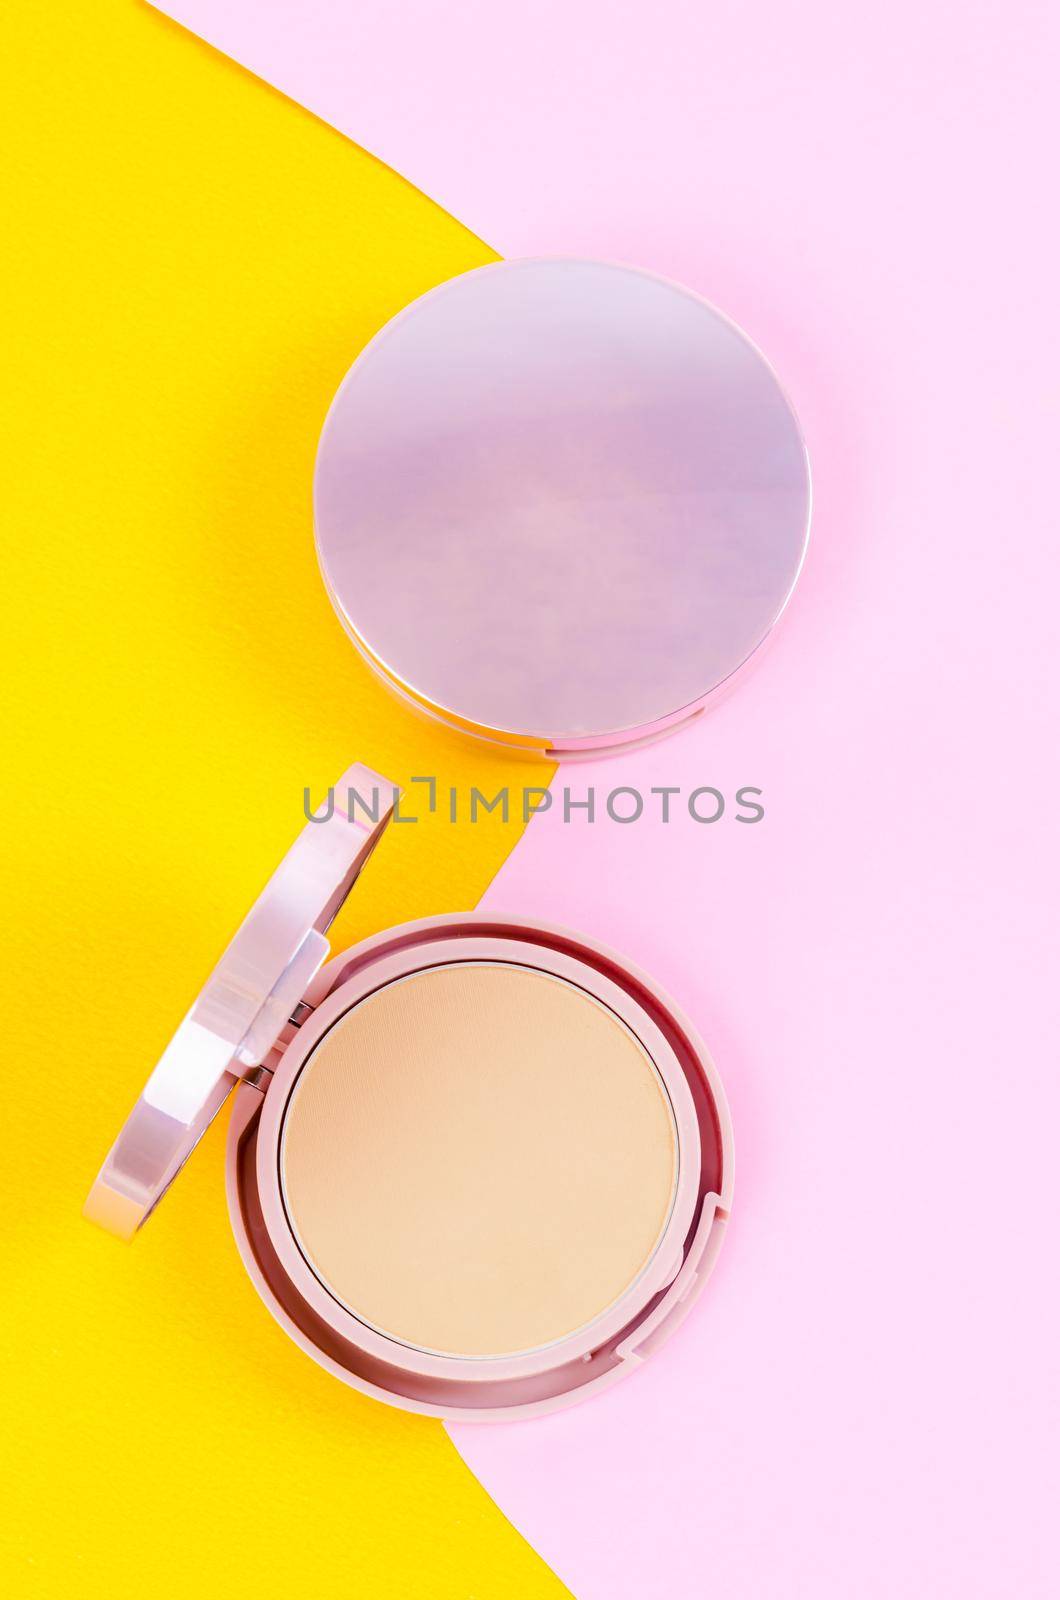 Face powder for makeup. by Gamjai